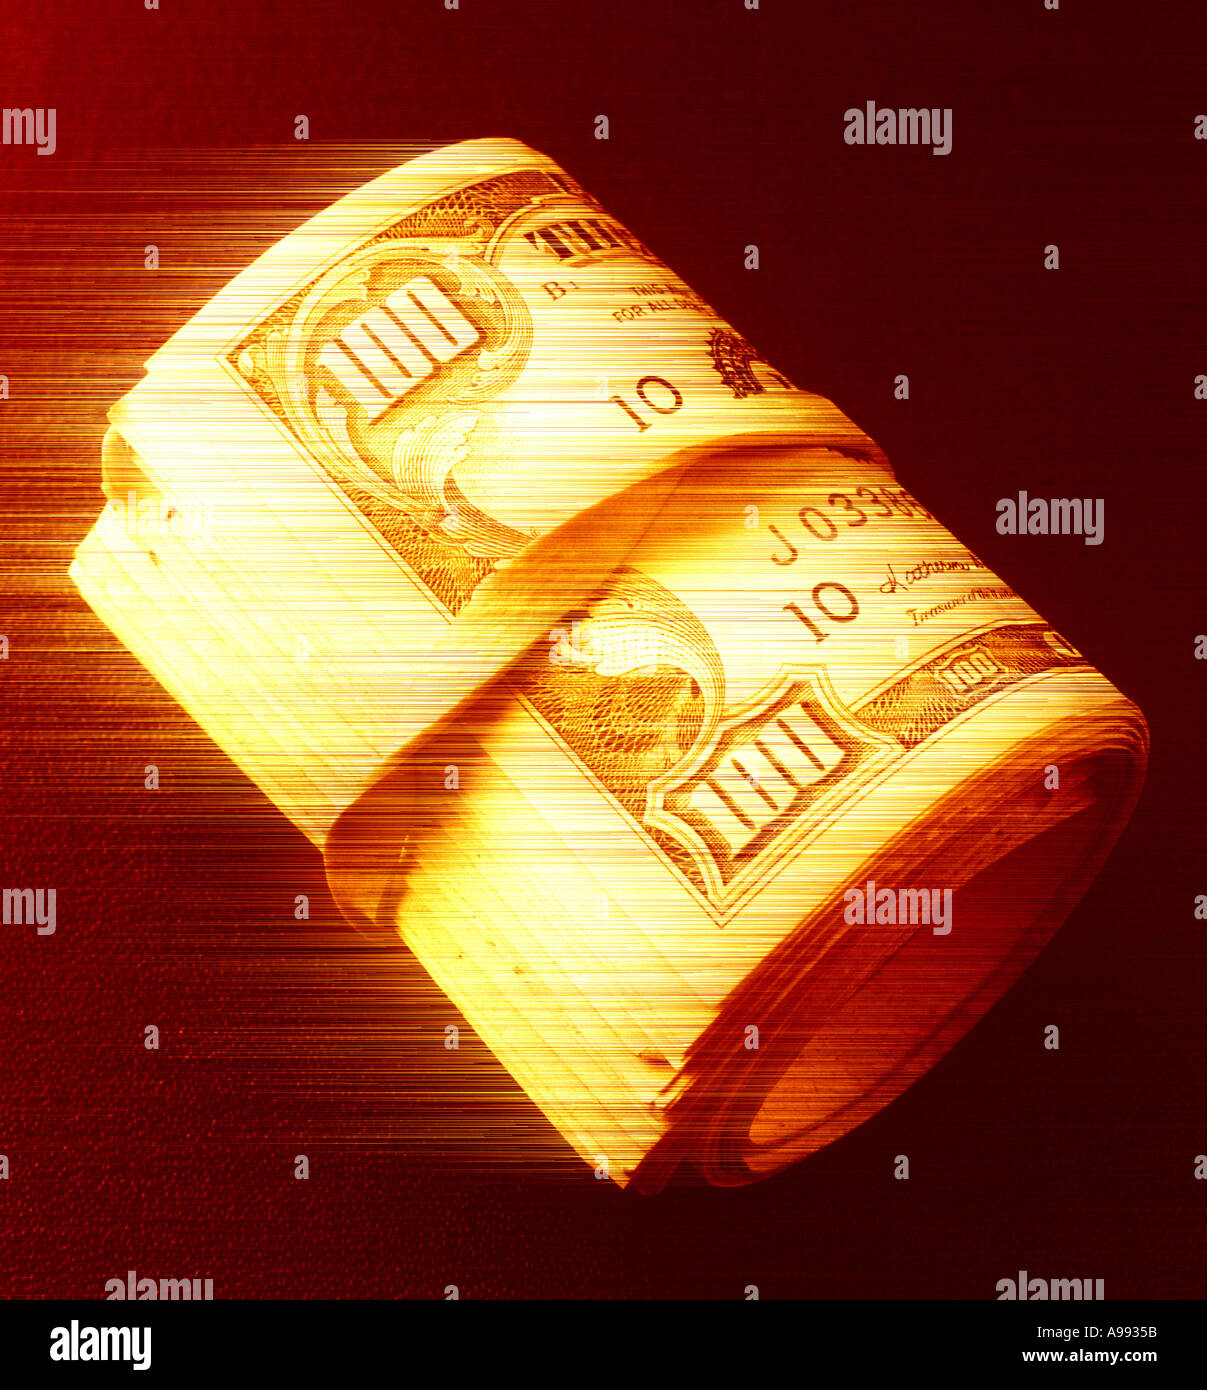 roll of 100 dollar bills US sepia toned abstract Stock Photo